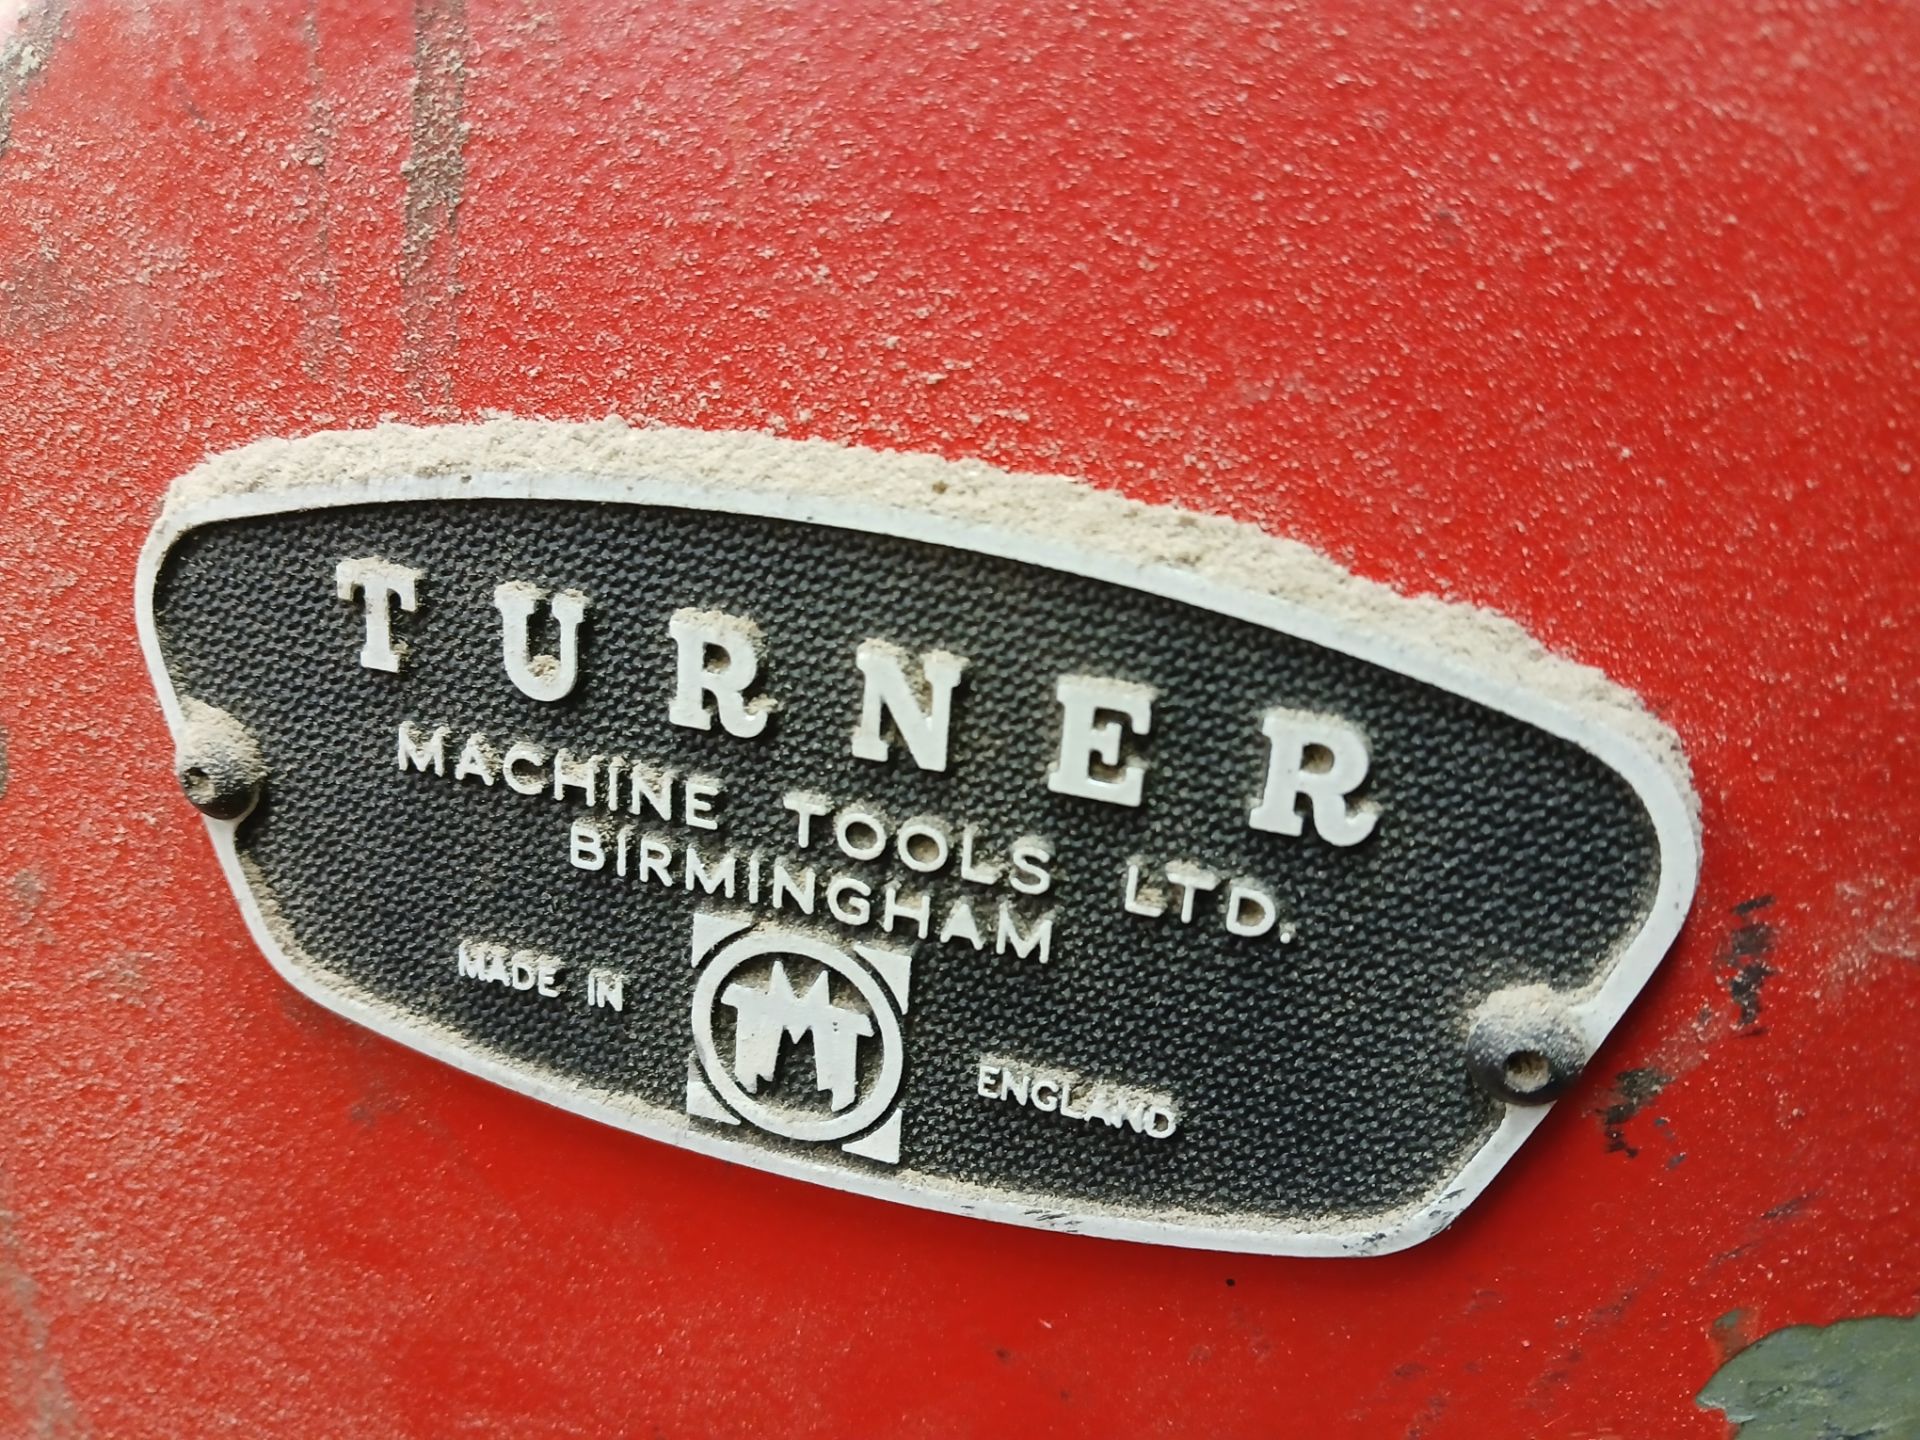 Turner RS5 rotary riveting machine Serial number 62475 – A Risk Assessment and Method Statement is - Bild 3 aus 5